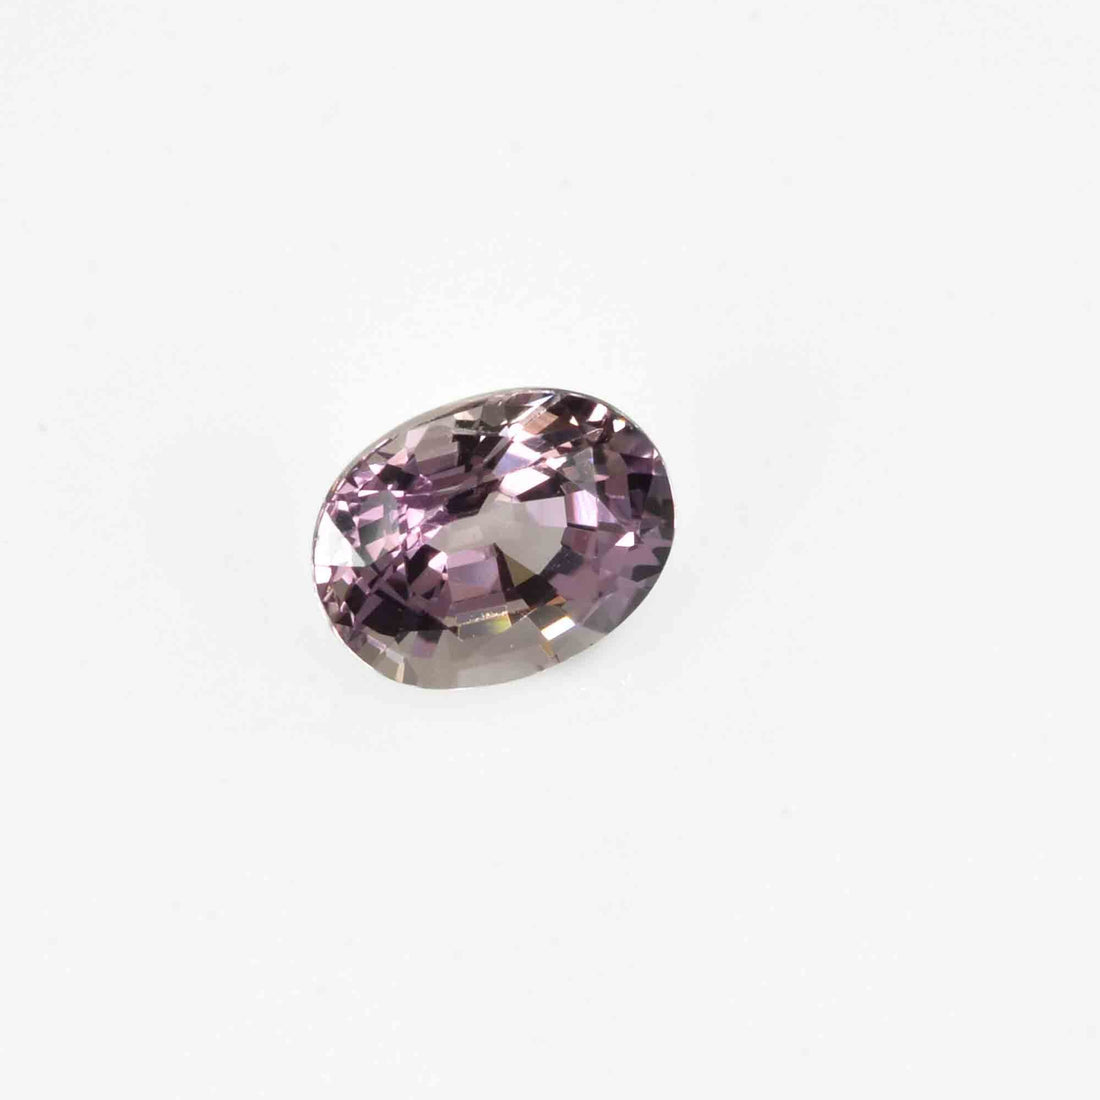 1.90 Cts Natural Fancy Sapphire Loose Gemstone Oval Cut